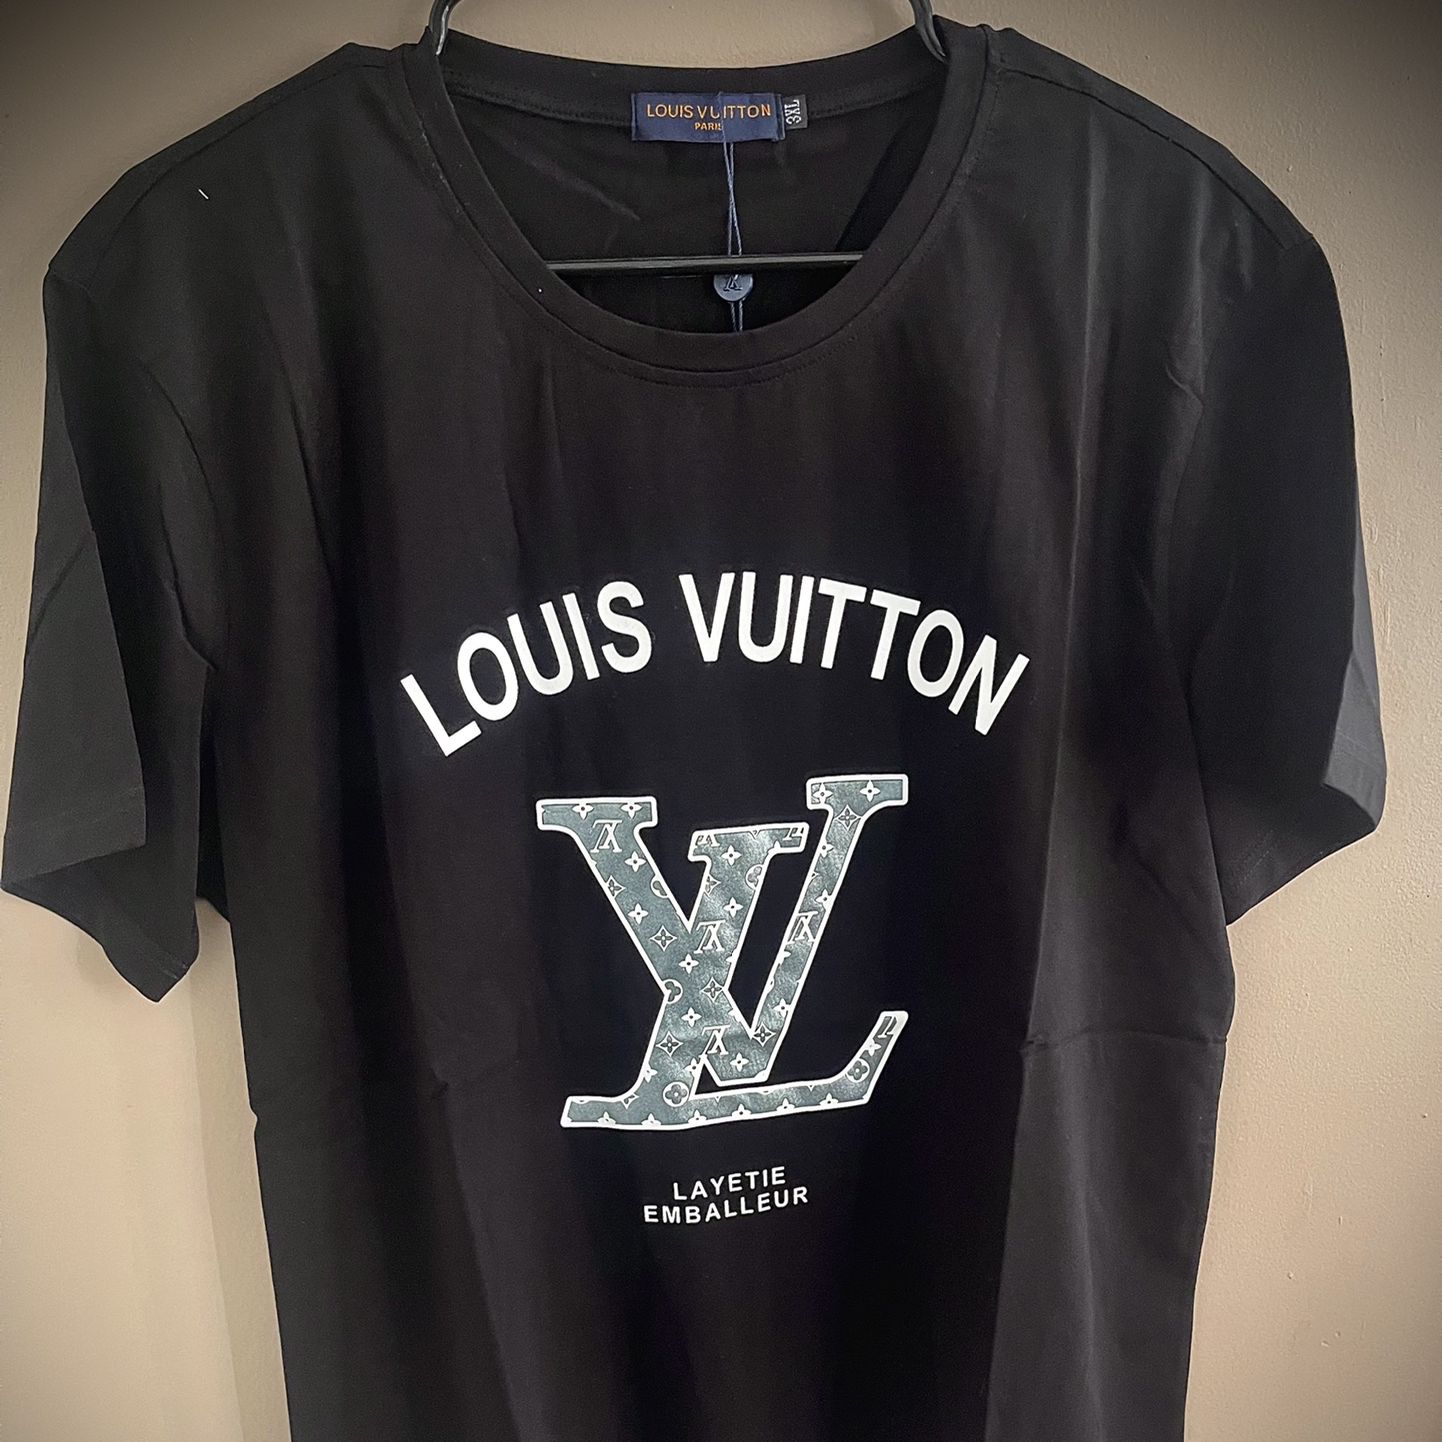 New Louis Vuitton Red Monogram Bandana Short-Sleeved Shirt (Size: Medium)  for Sale in Valley Stream, NY - OfferUp